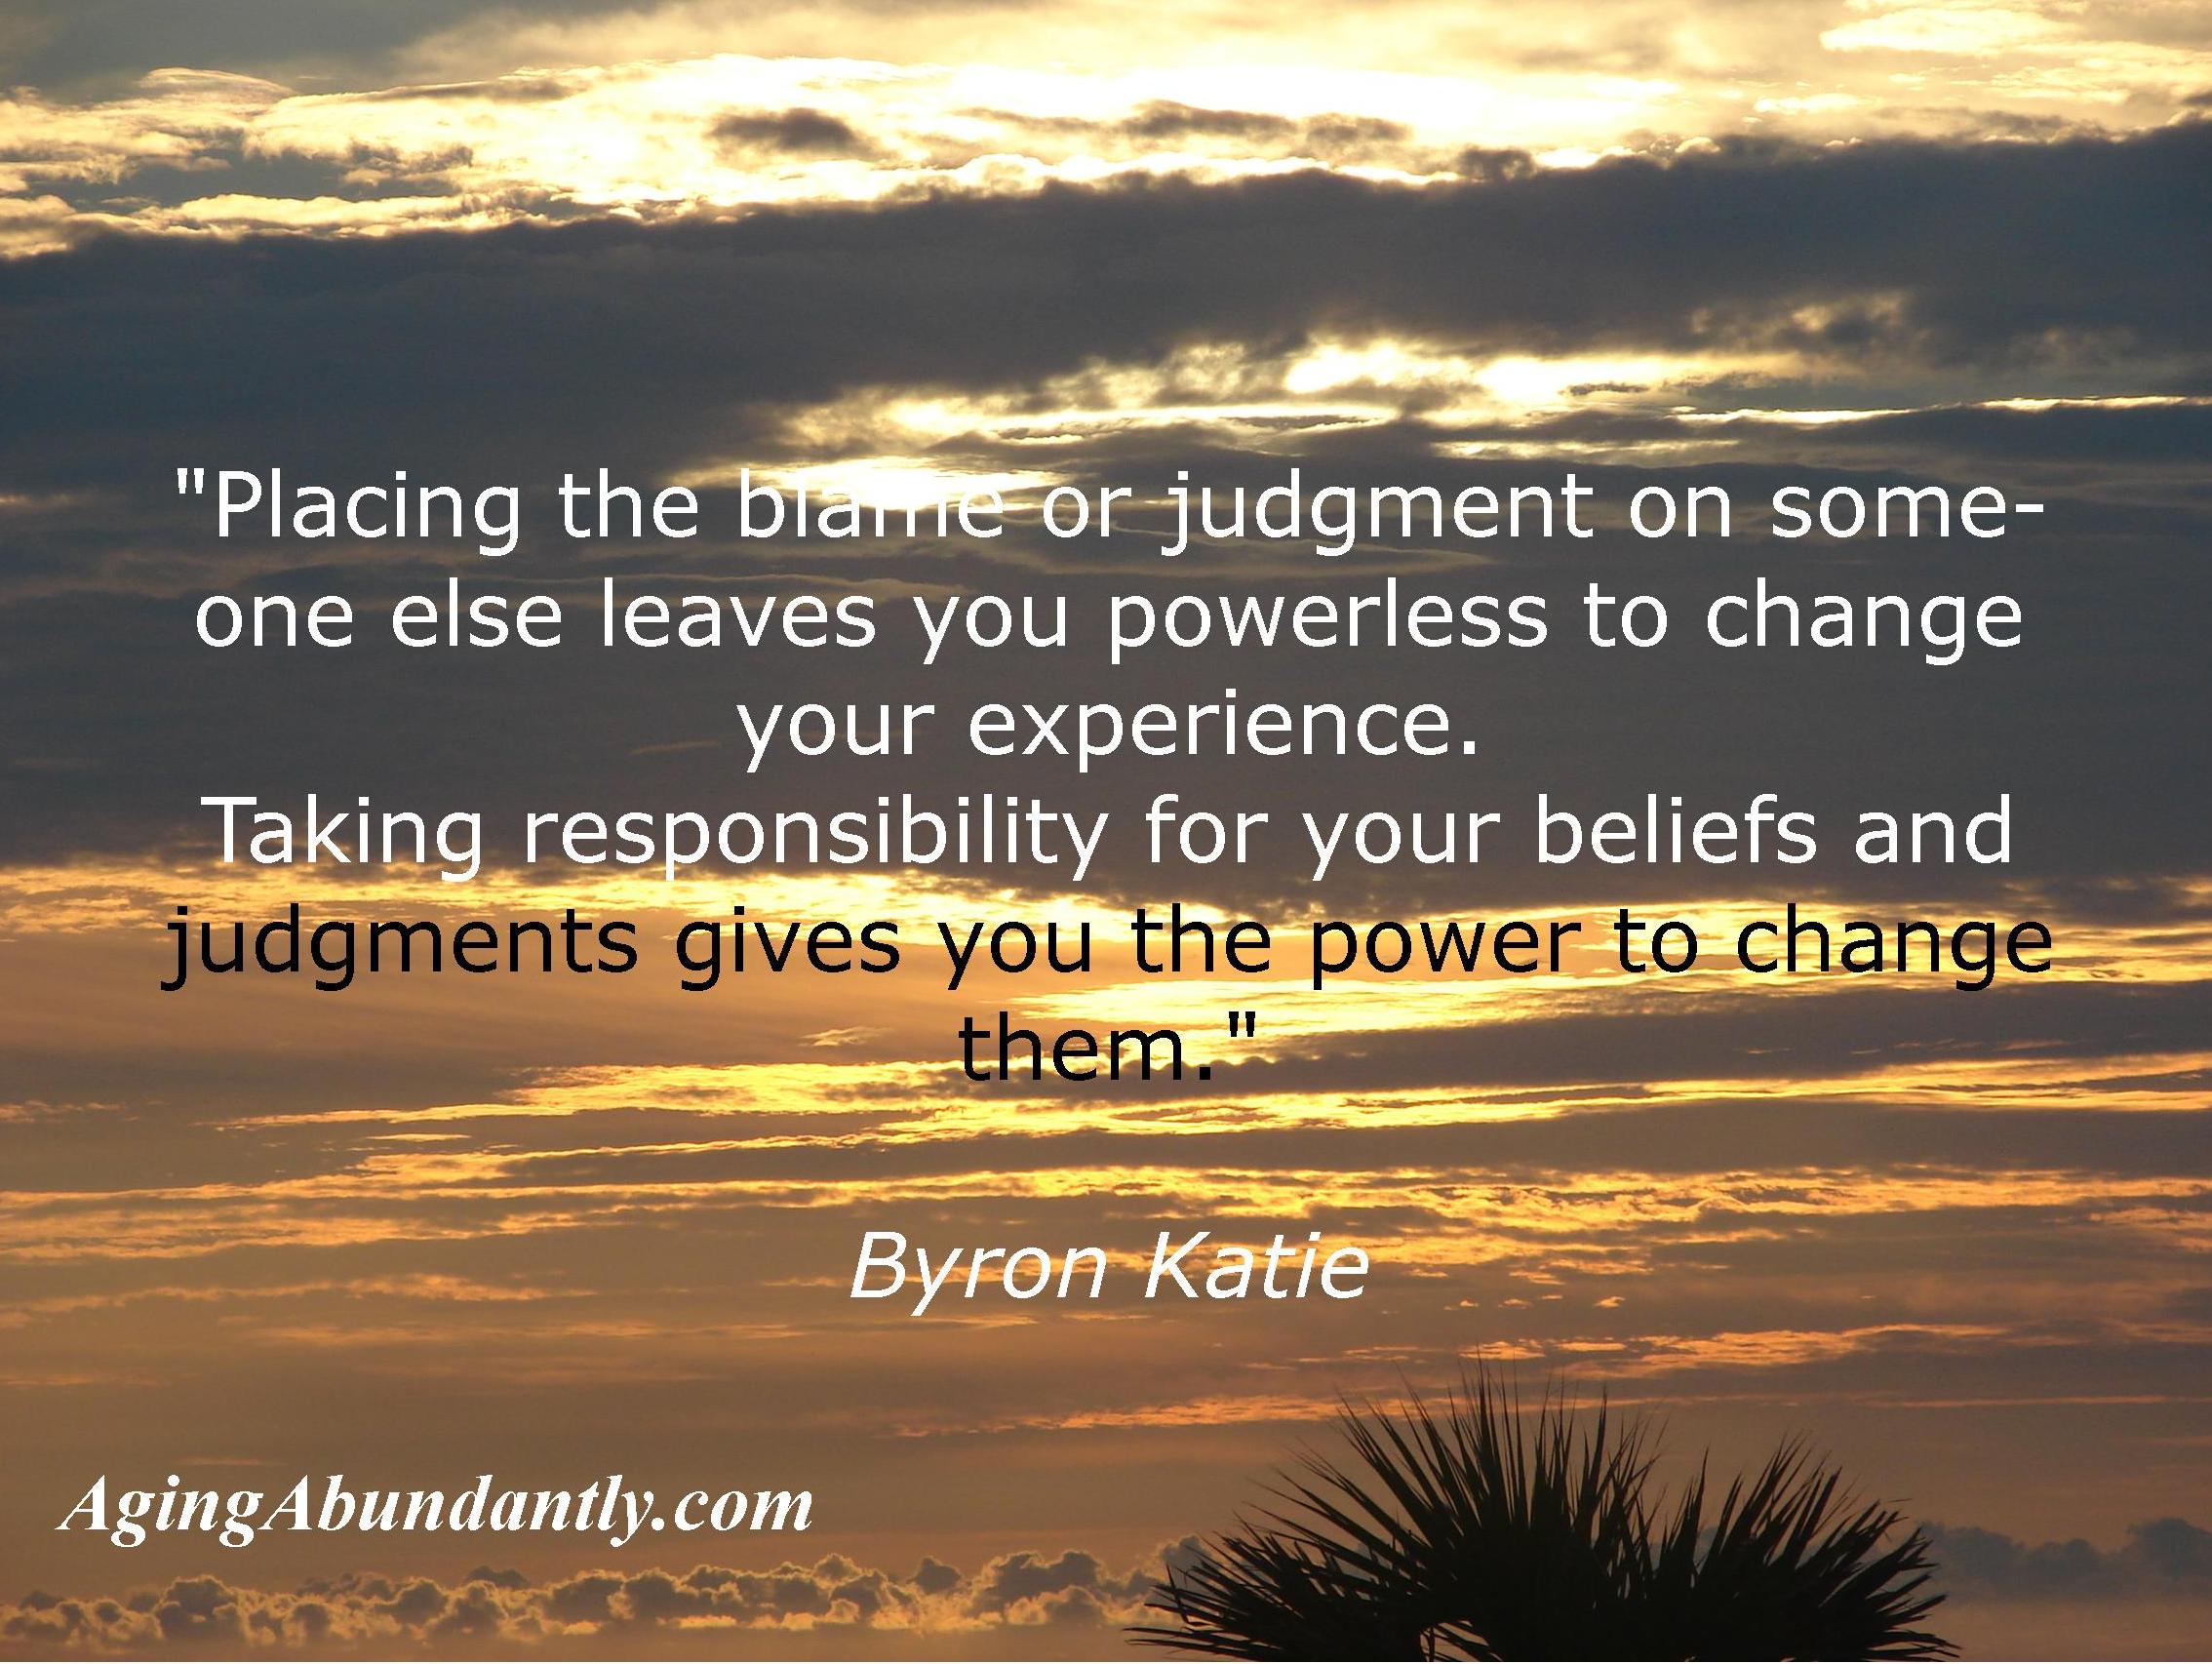 Placing the blame or judgment on someone else leaves you powerless to change your experience; taking responsibility for your beliefs and judgments gives you the power to change them.